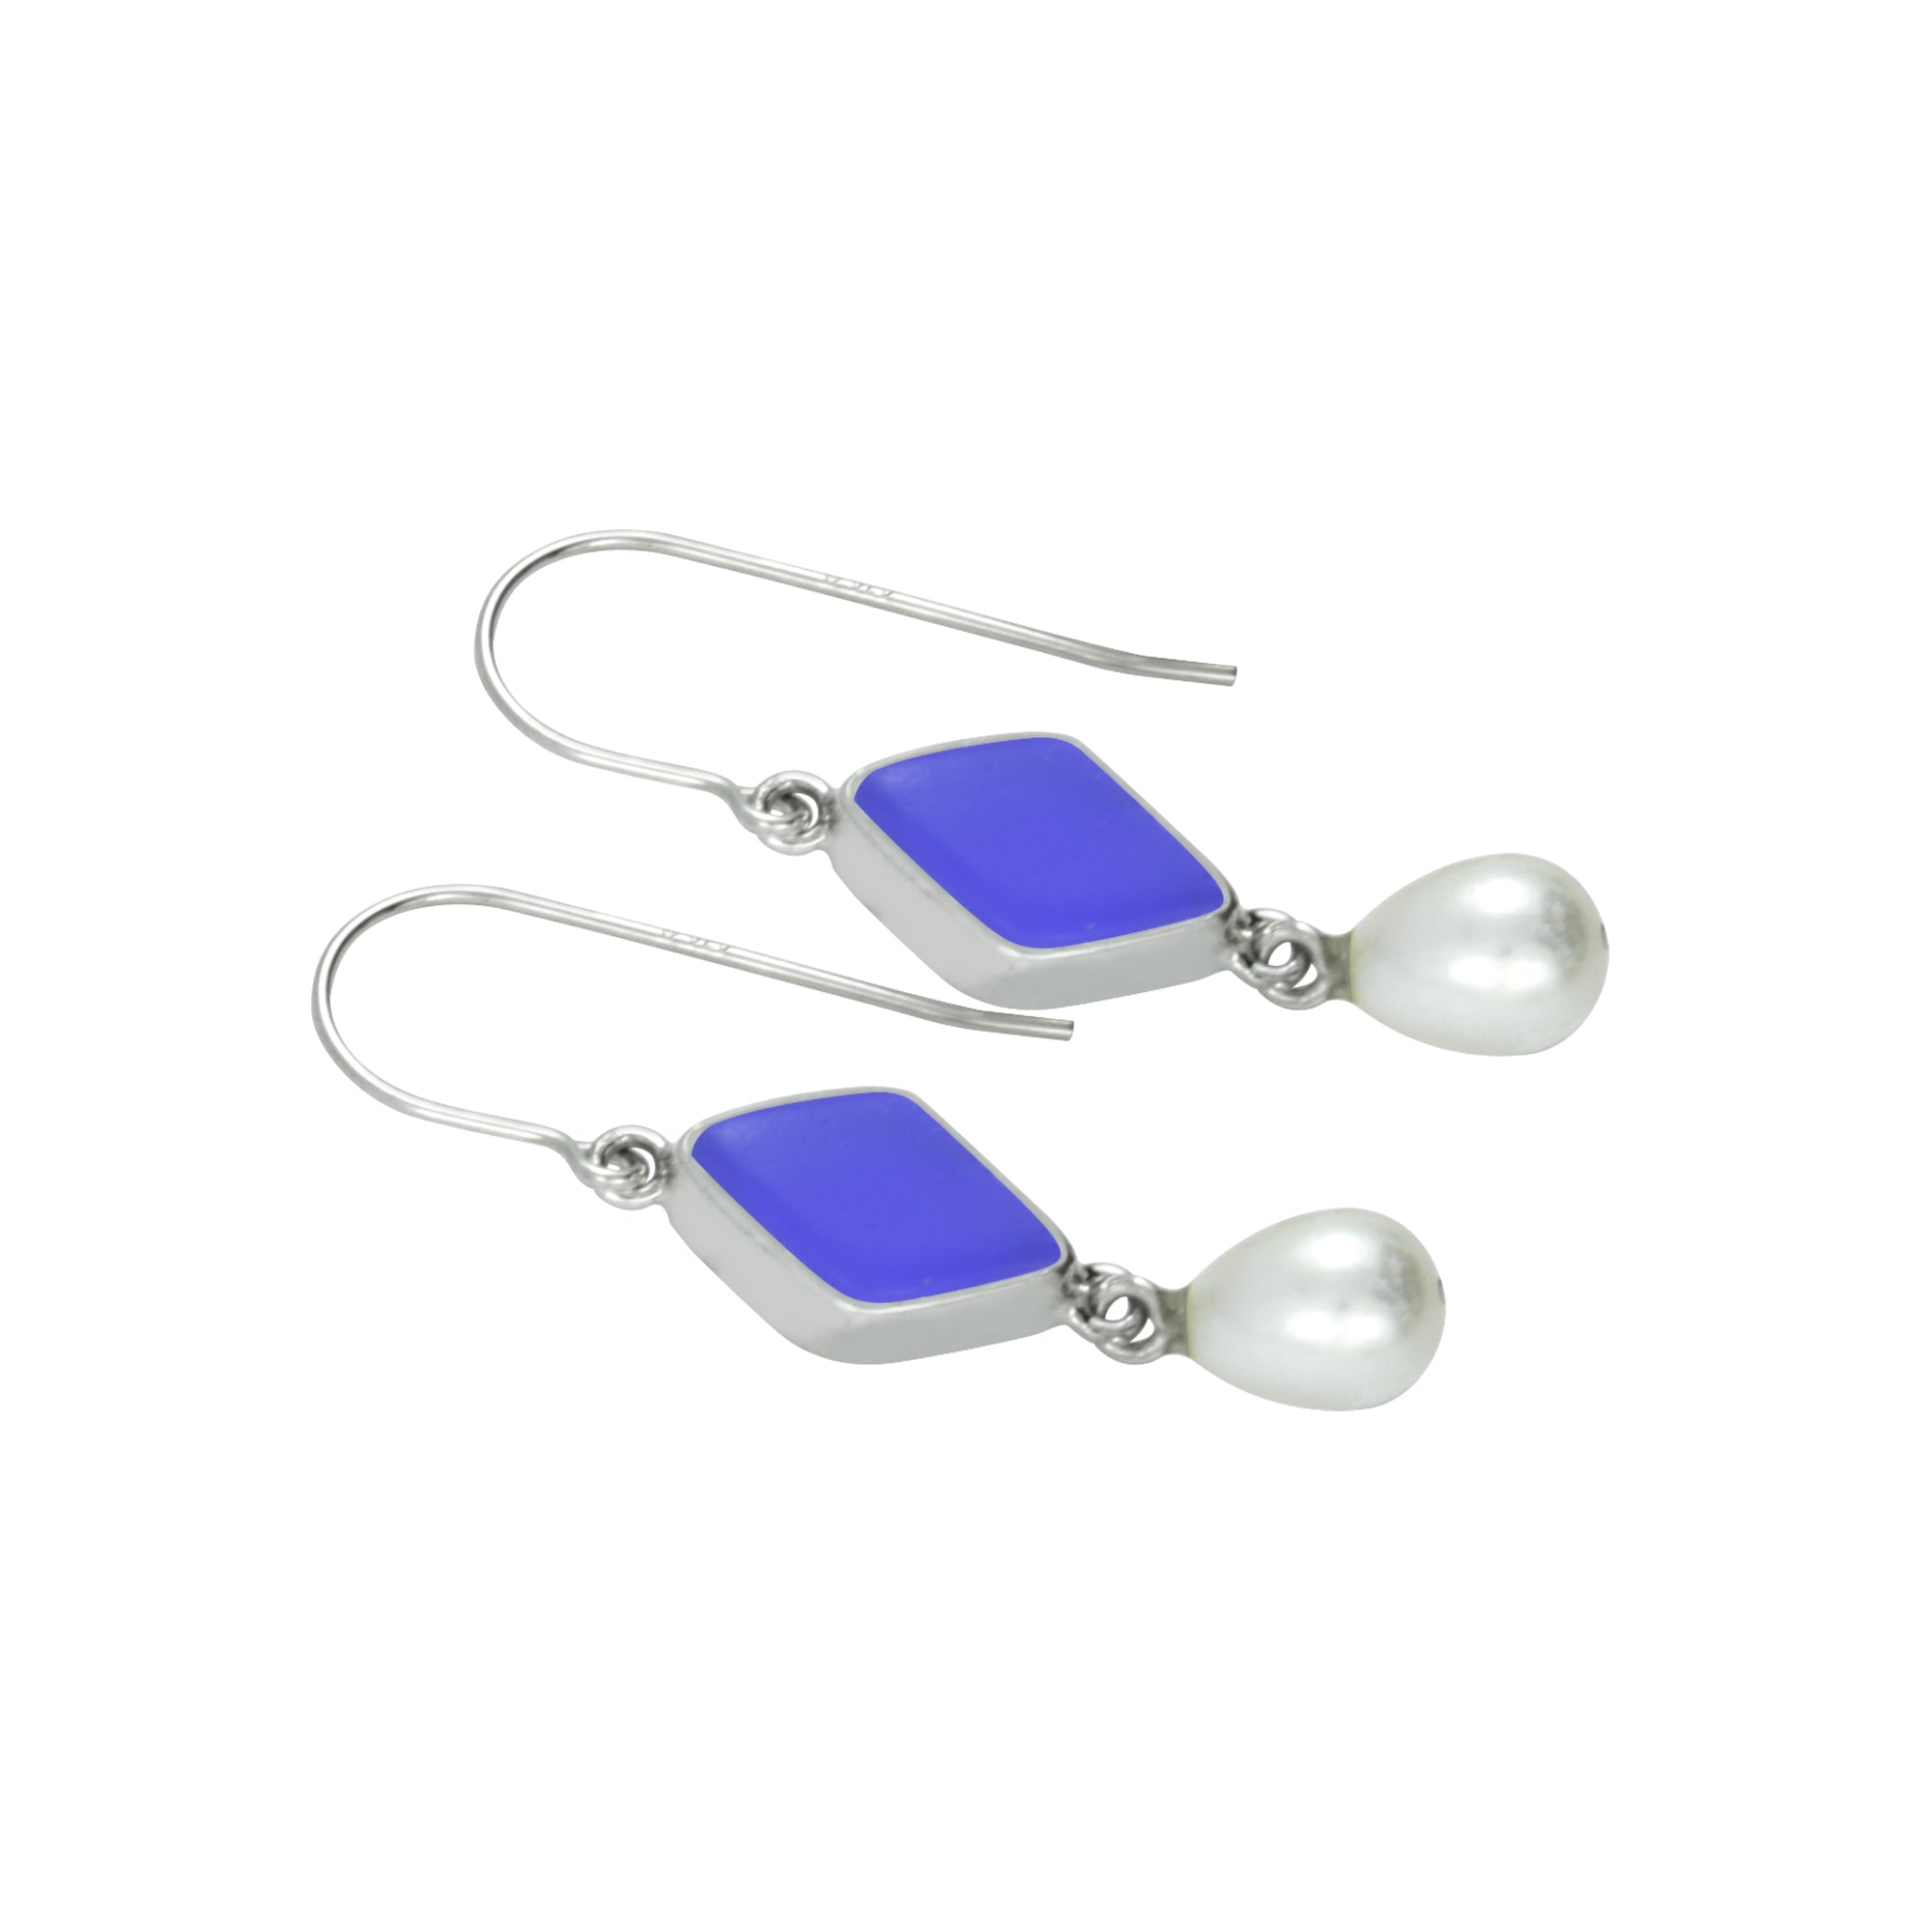 Cobalt Blue Sea Glass Earring With Pearl Drop